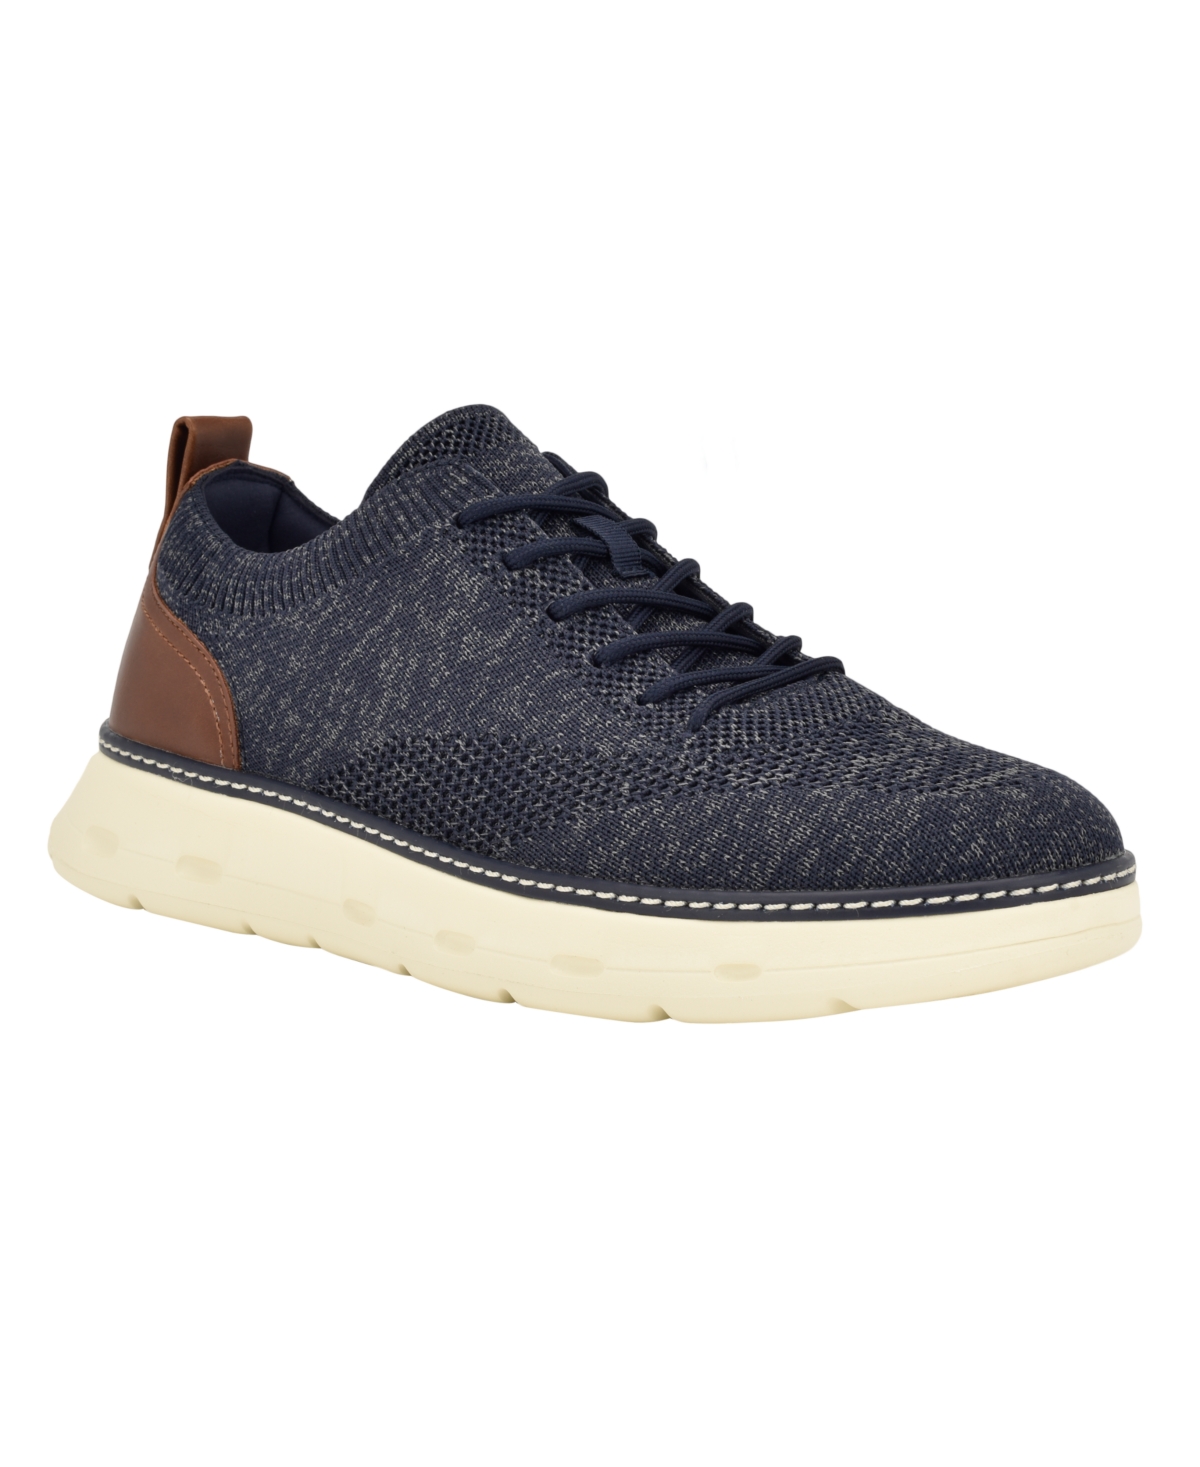 Tommy Hilfiger Men's Sangy Casual Sneaker Oxfords In Navy,cognac Multi